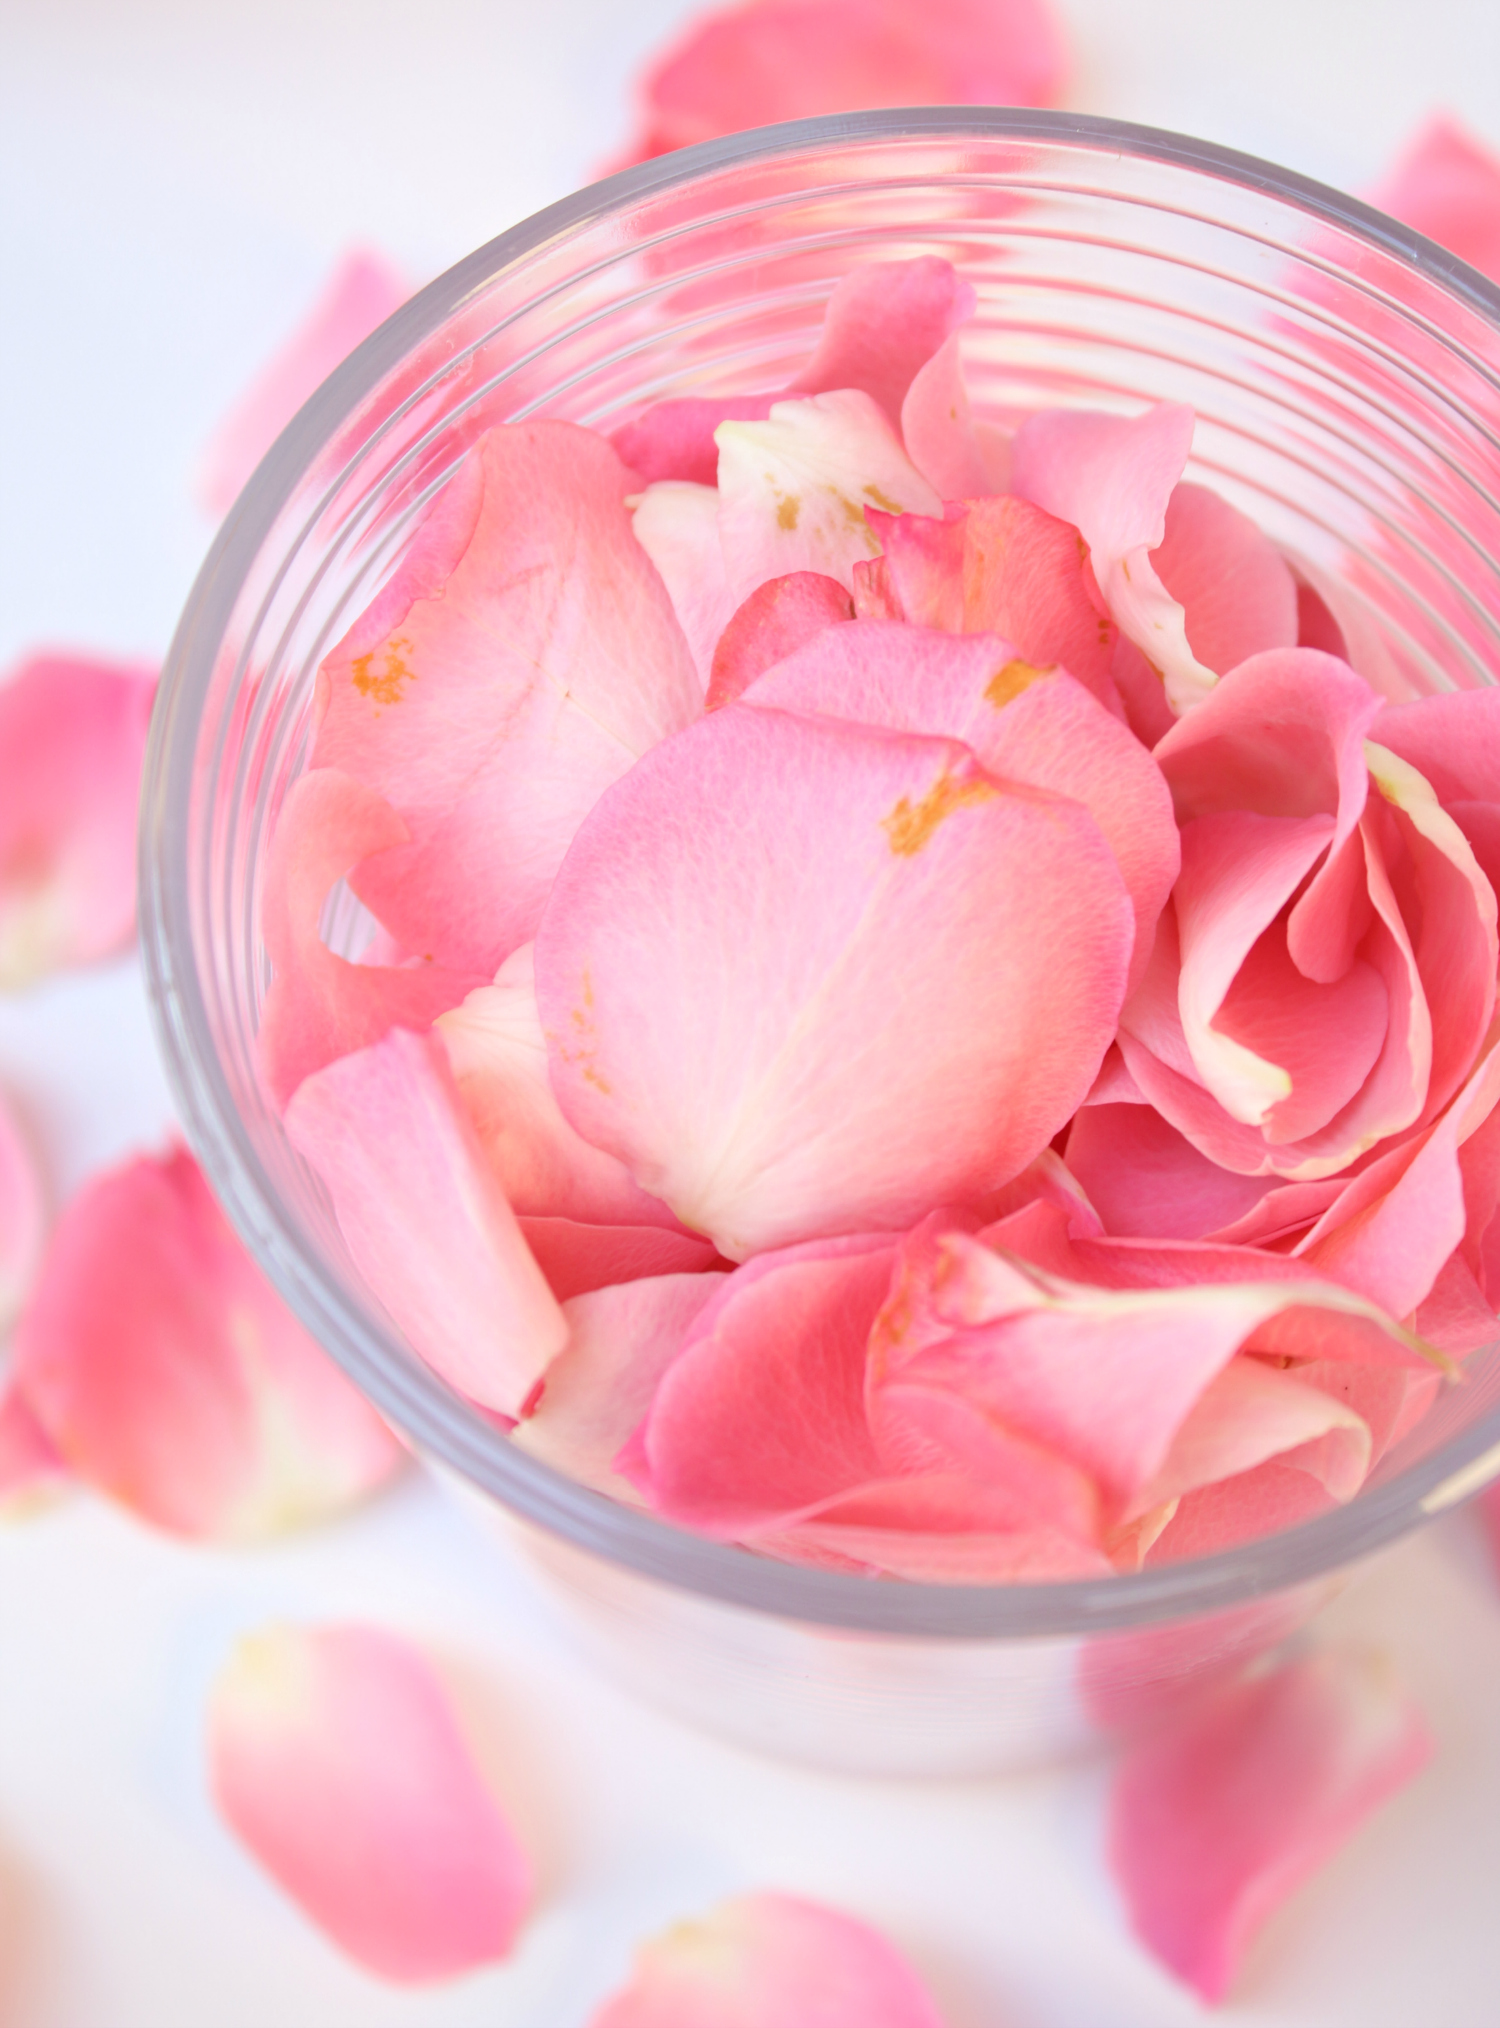 Homemade rose water recipe from blogger Stephanie Ziajka on Diary of a Debutante